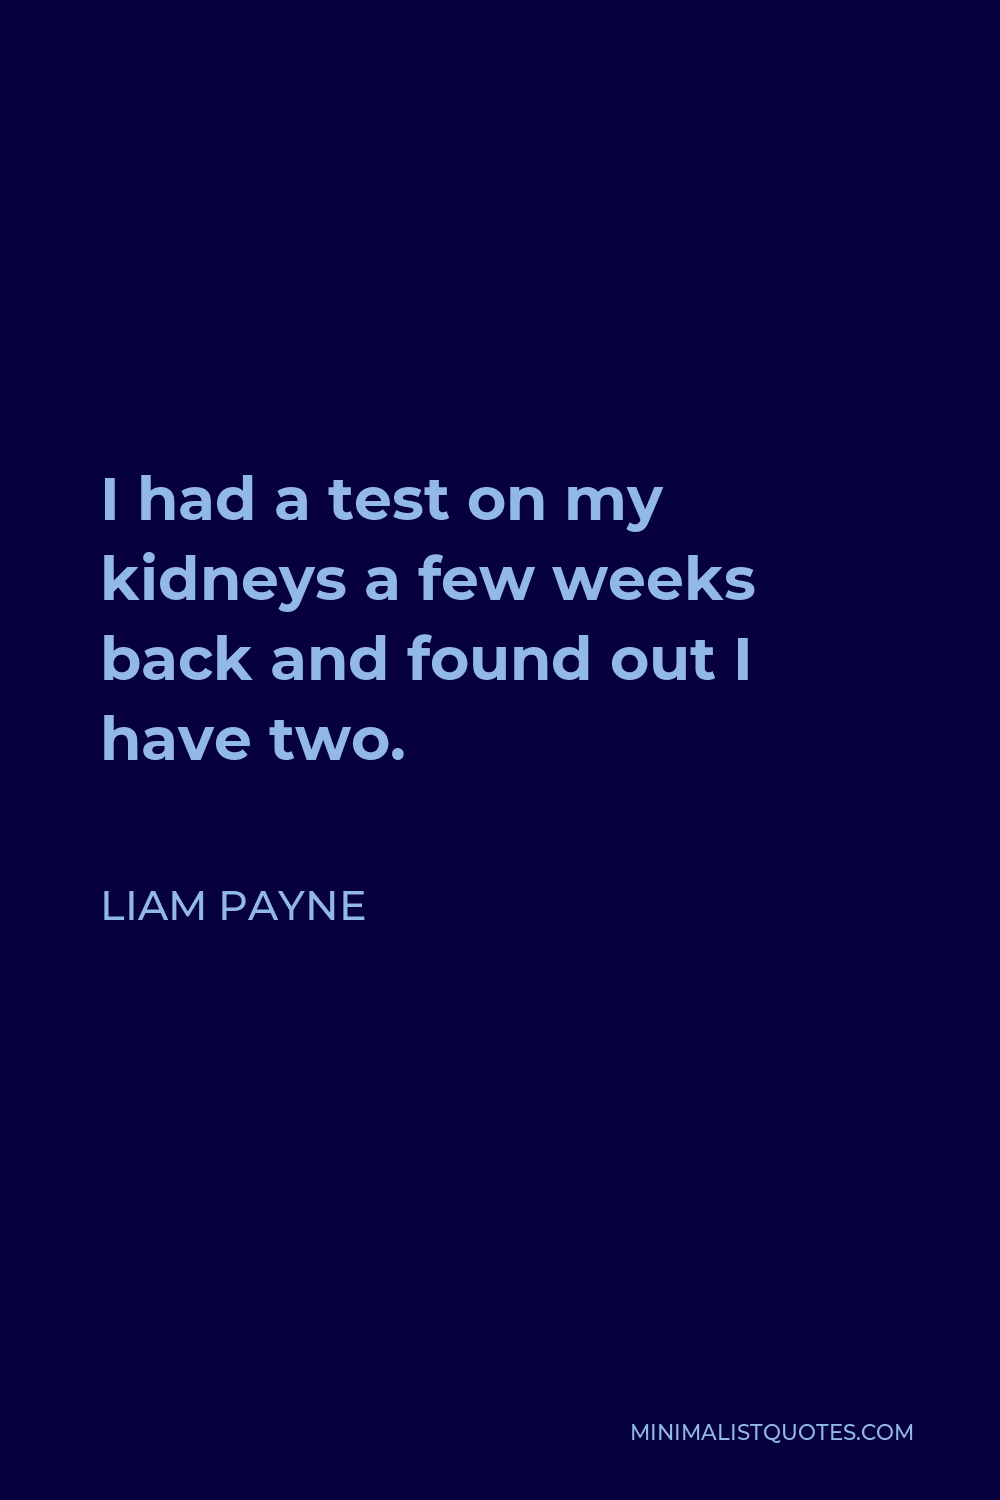 Liam Payne Quote - I had a test on my kidneys a few weeks back and found out I have two.